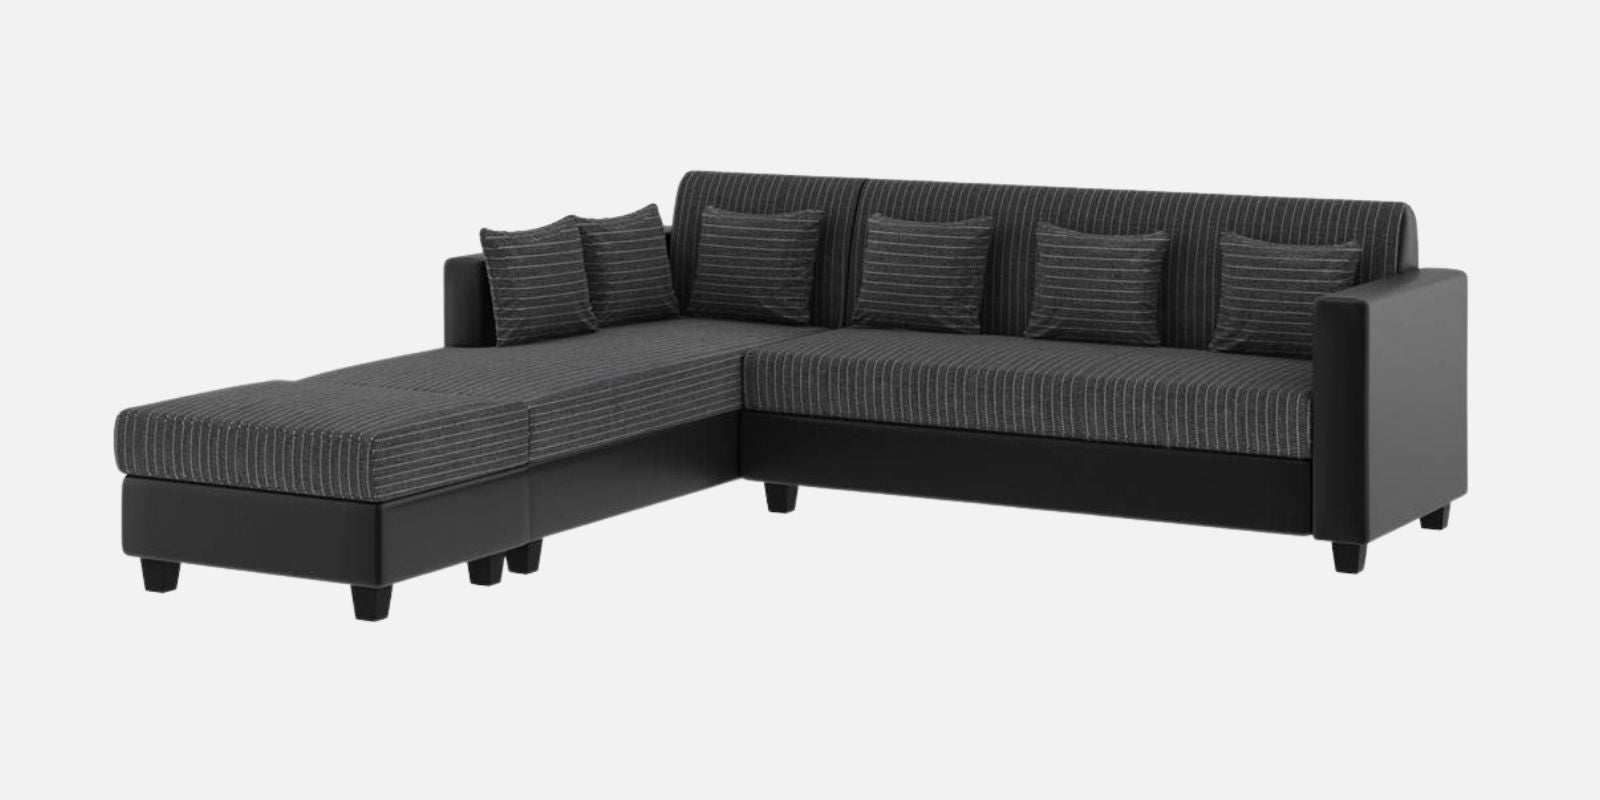 Baley Fabric RHS Sectional Sofa (3 + Lounger) In Lama Black Colour